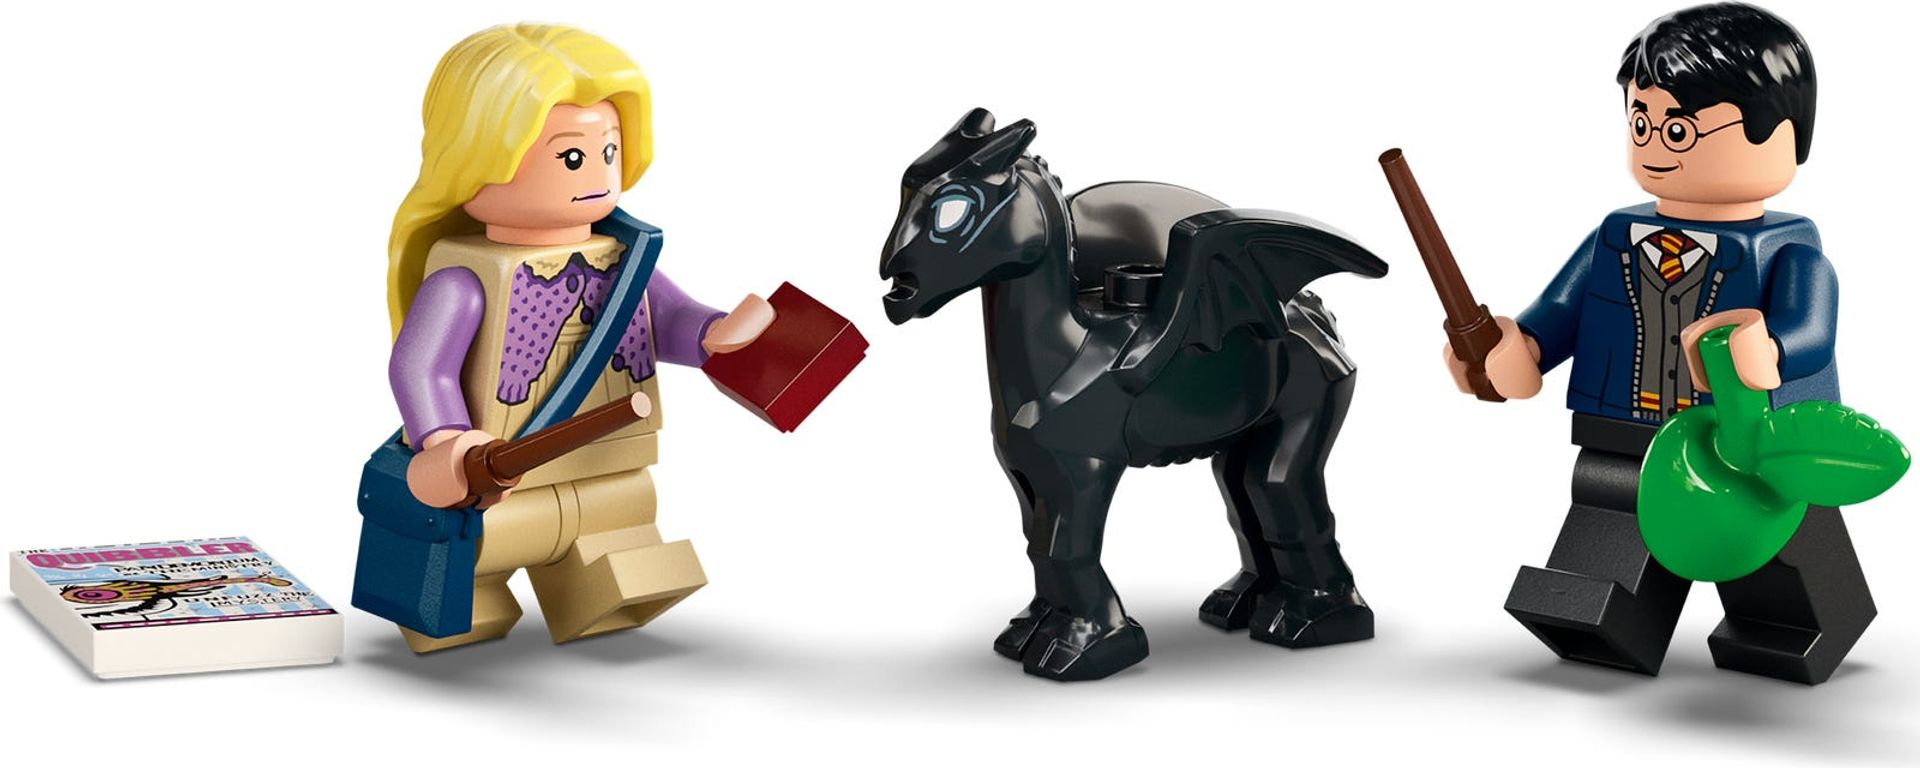 LEGO® Harry Potter™ Hogwarts™ Carriage and Thestrals minifigures